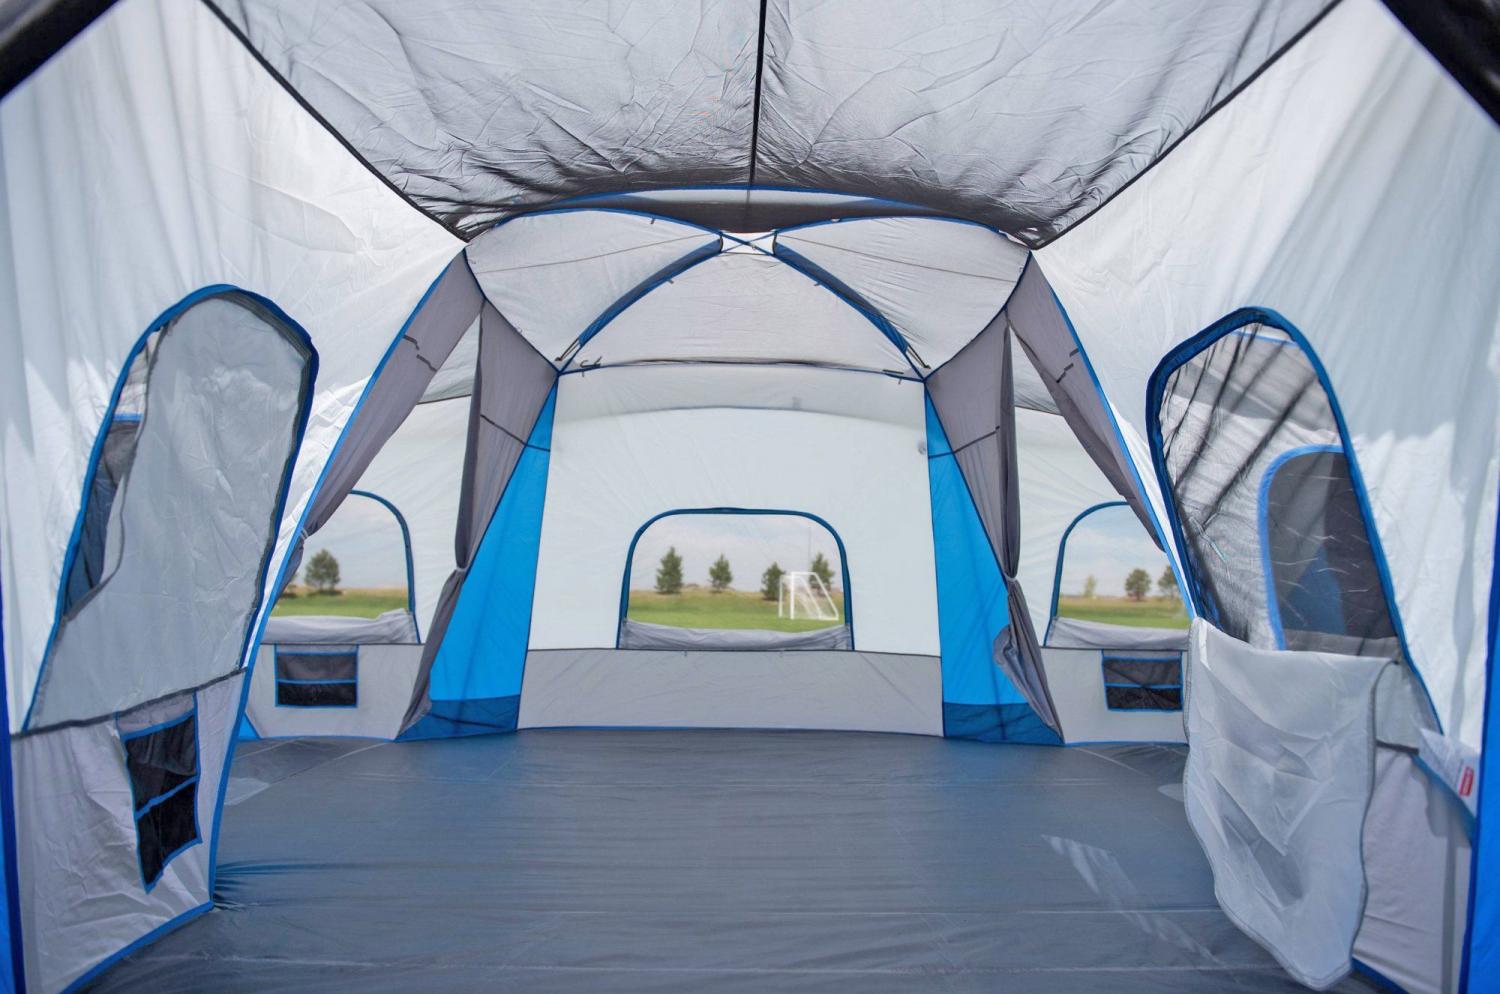 Giant 20-Person Tent With 5 Bedroom Compartments